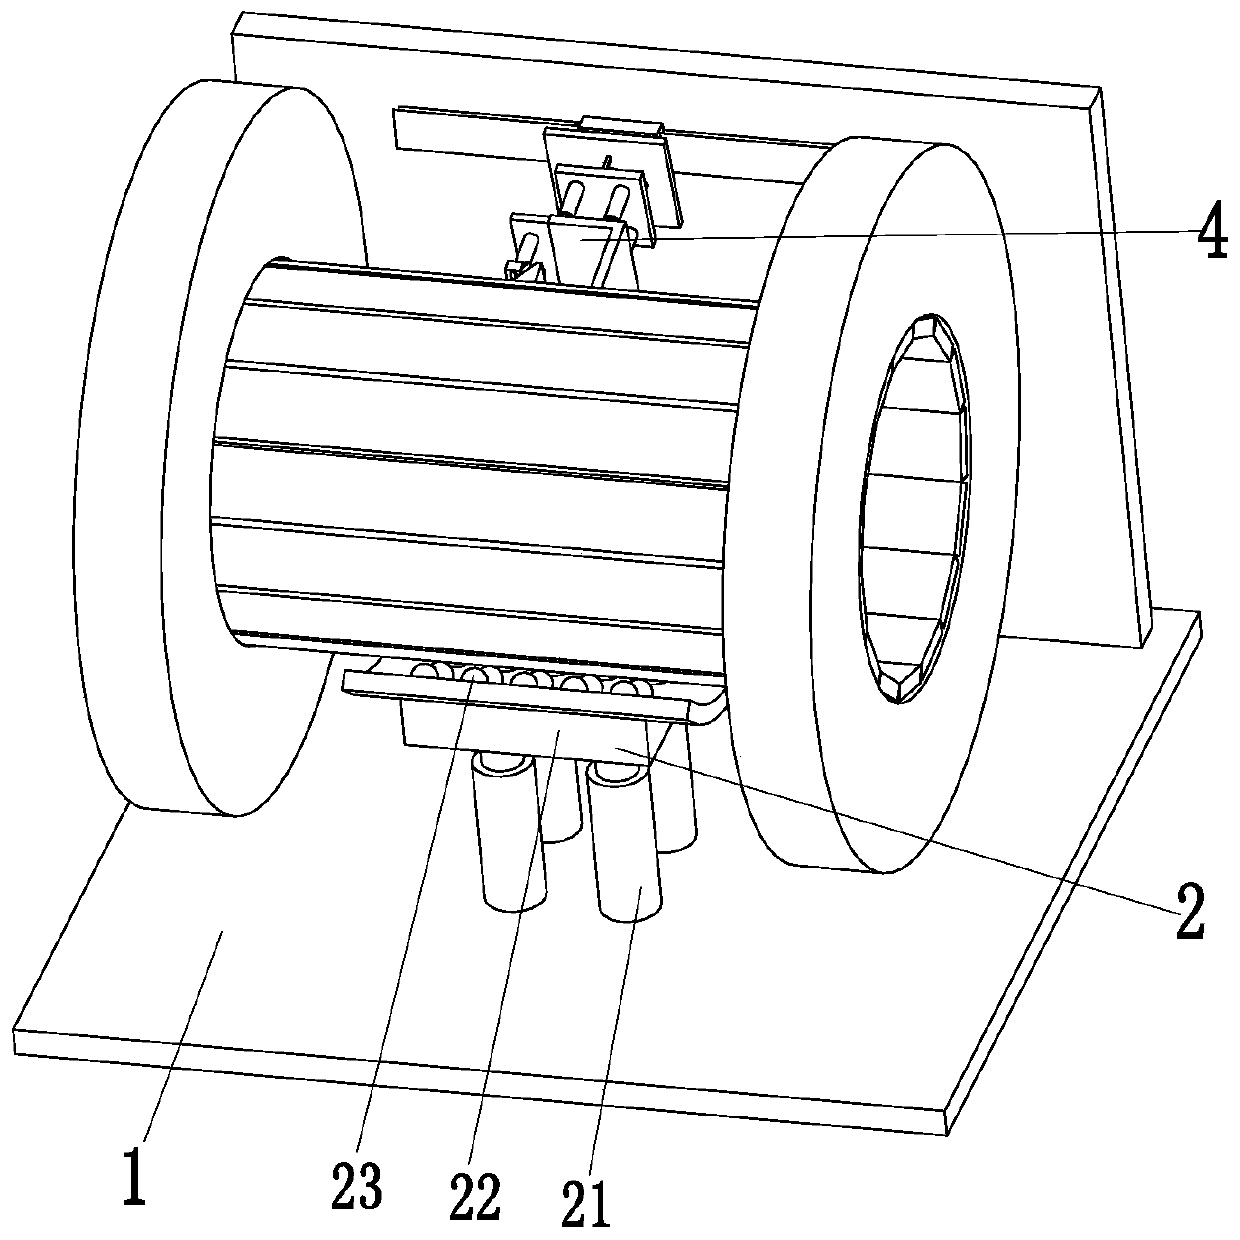 A power cable reel automatic processing and detection frame